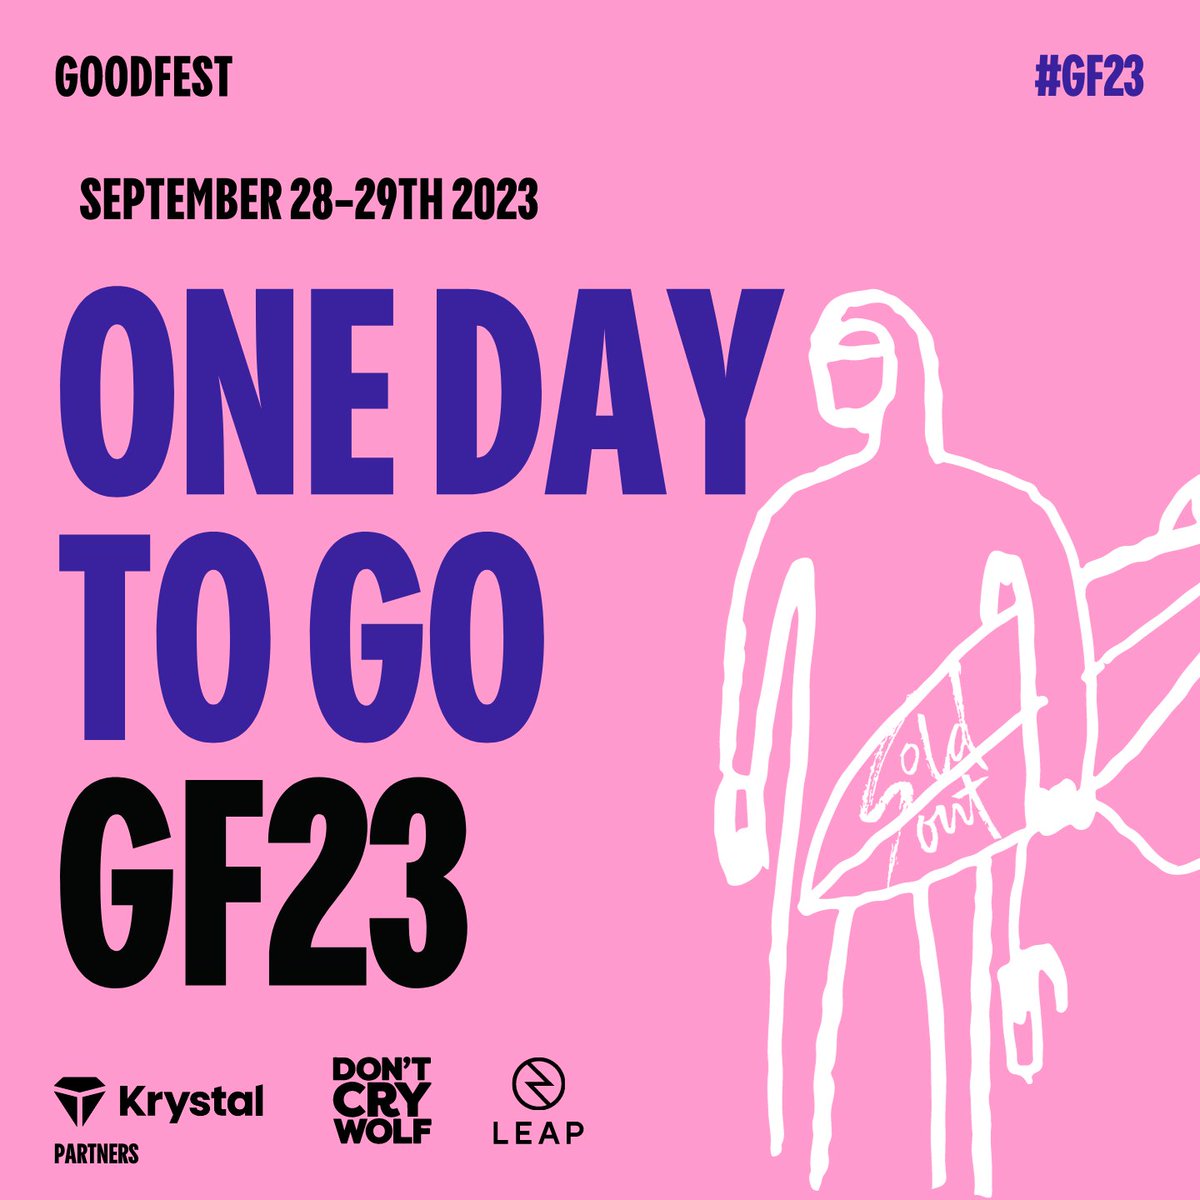 1 day to go and we've officially SOLD OUT 🤙 As always we give special thanks to everyone who has partnered, supported, shared, participated in #GF23, we can't wait for all the GOOD to start tomorrow at @BedruthanHotel 🙌🌍 See you there 👋 #GF23 #Goodfest #GoodfestCornwall